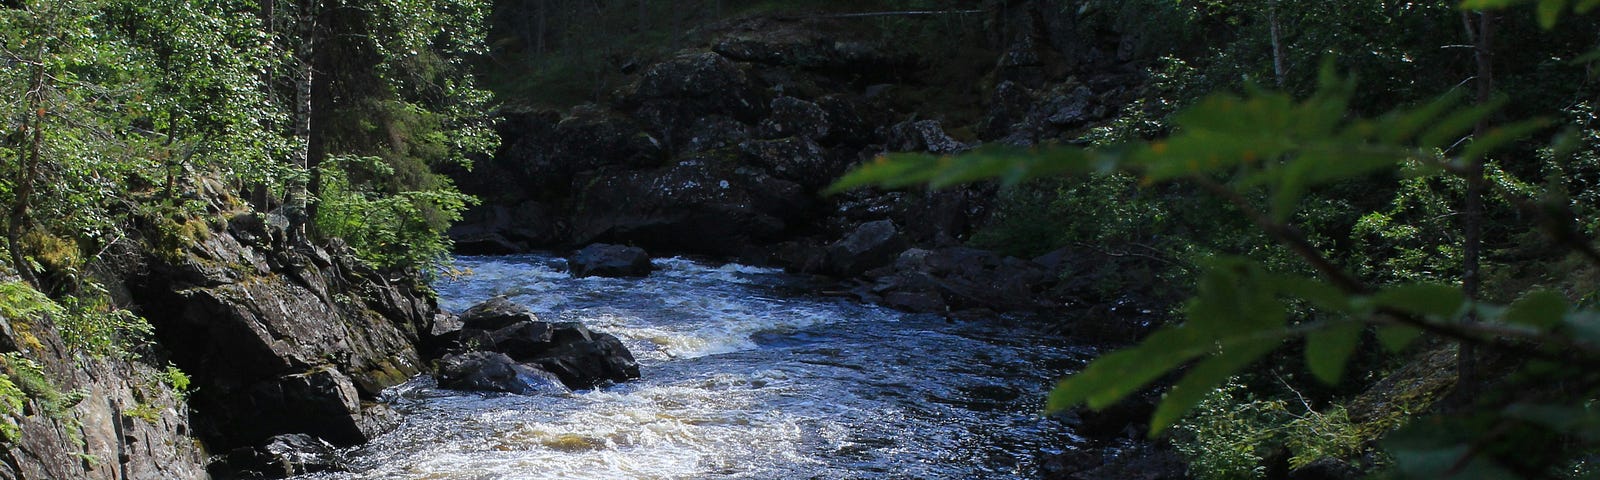 Sunlit rapids on the left of the frame lead into the shadows down river and around the bend.